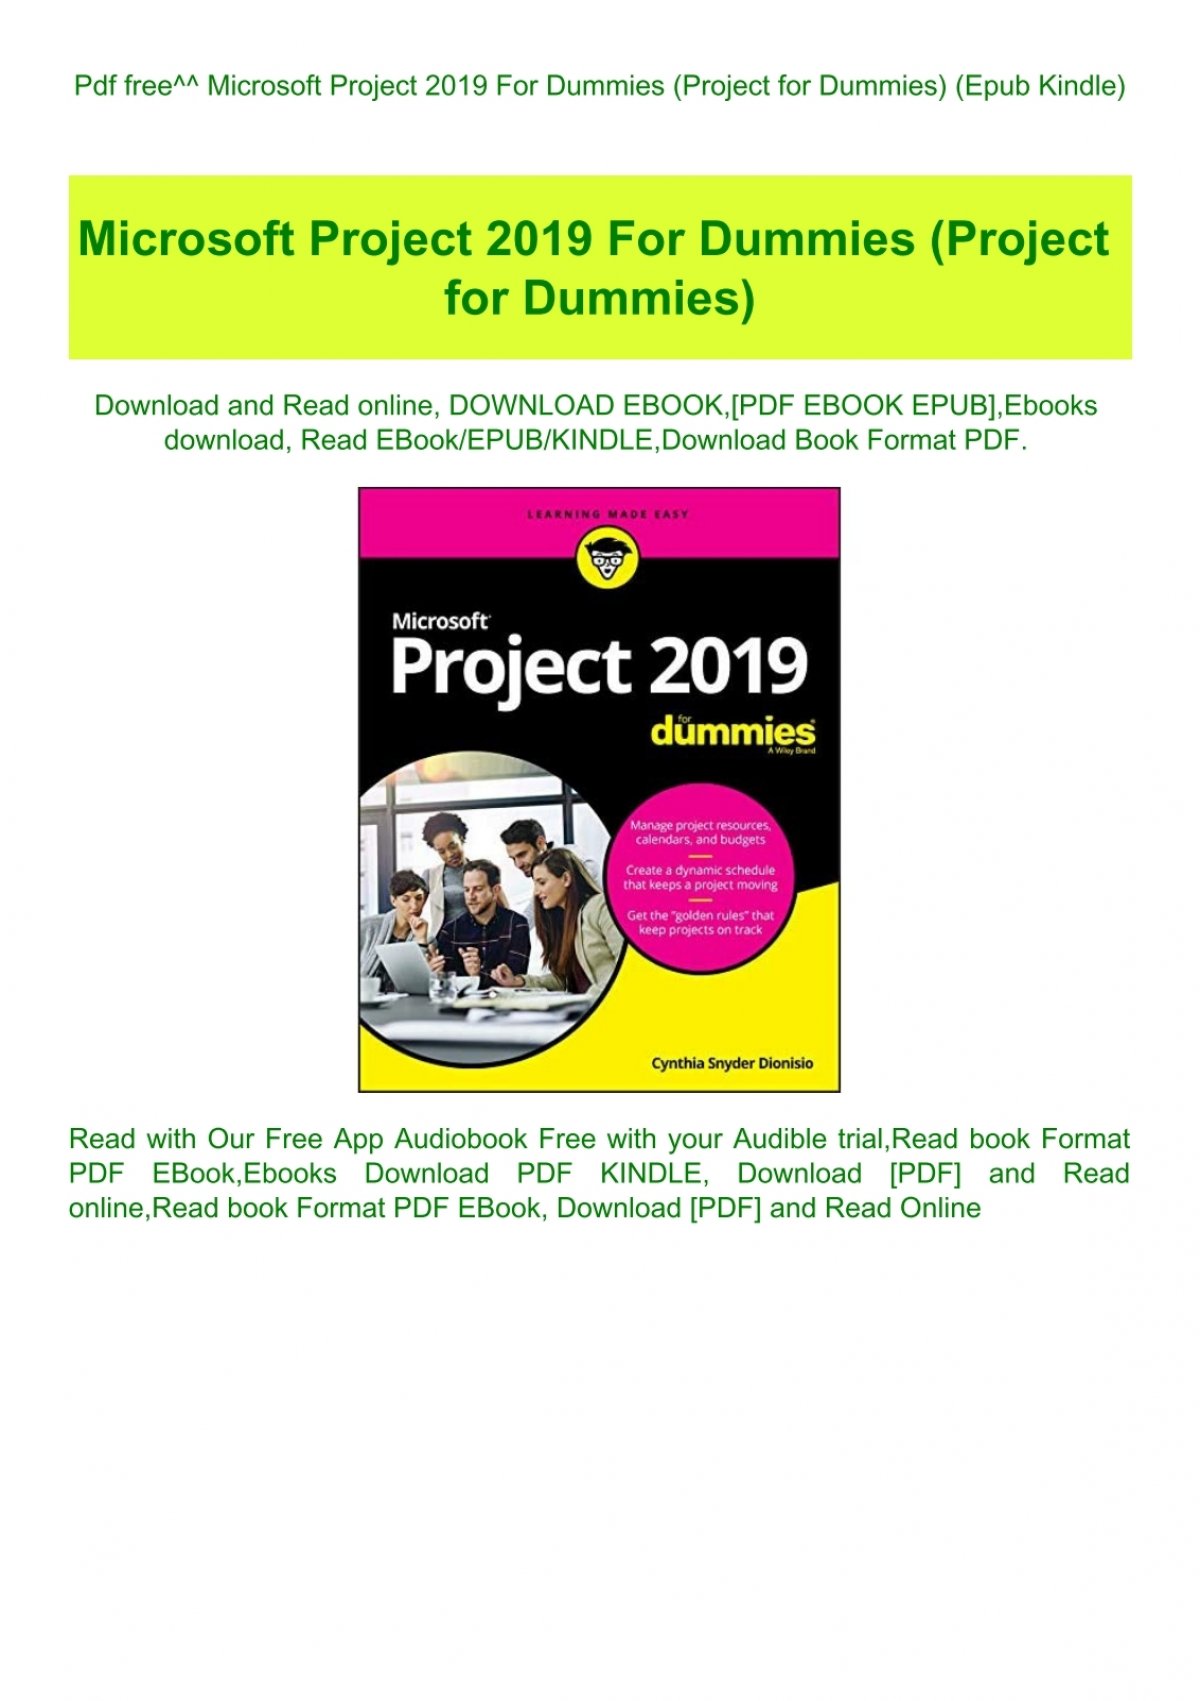 Pdf Free Microsoft Project 2019 For Dummies Project For Dummies Epub Kindle